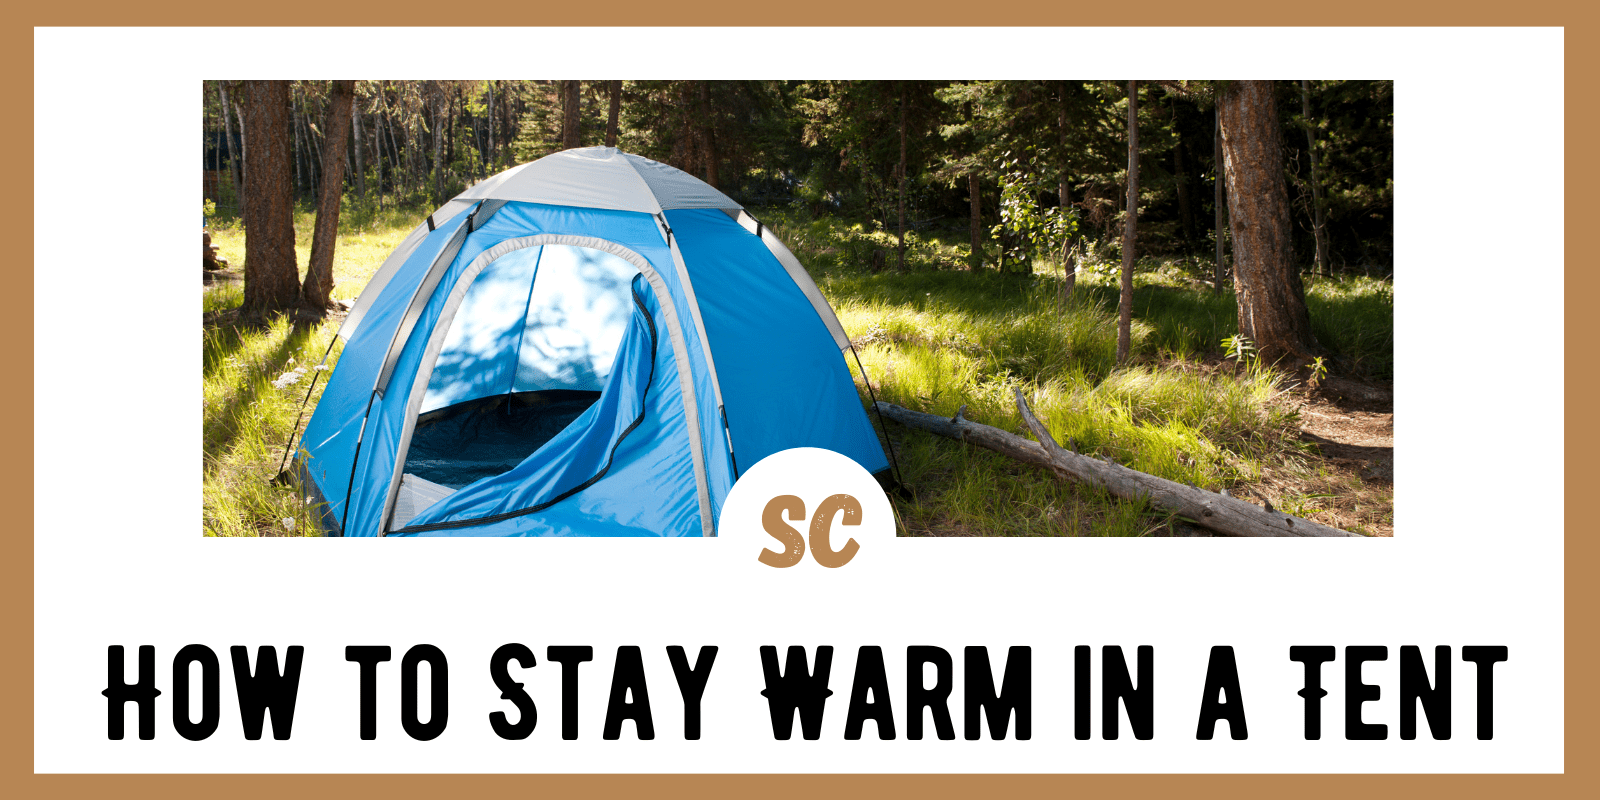 How to Stay Warm in a Tent: Top 16 Tips by Experts